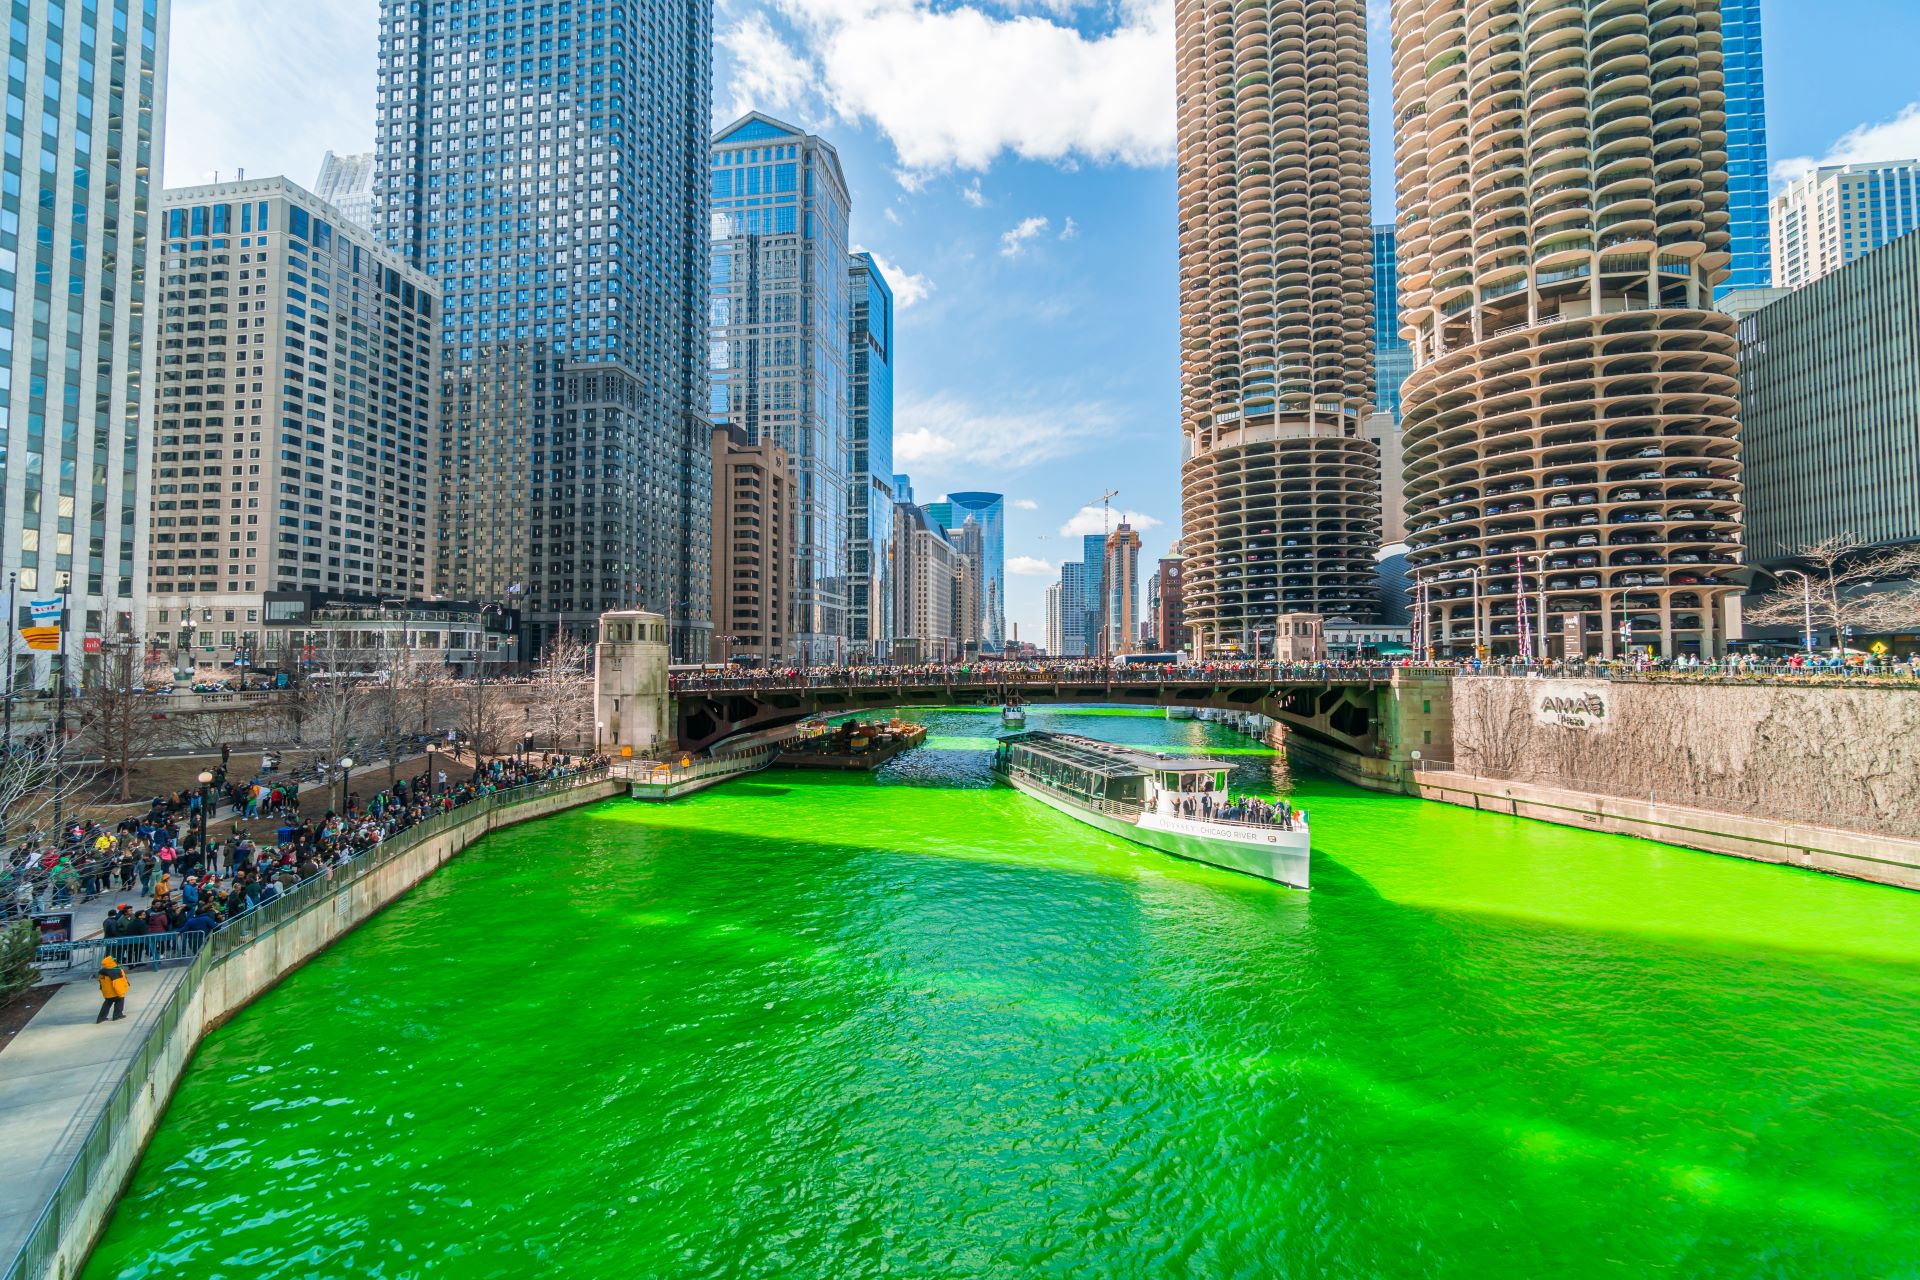 Experts debate the safety of dying the Chicago River green